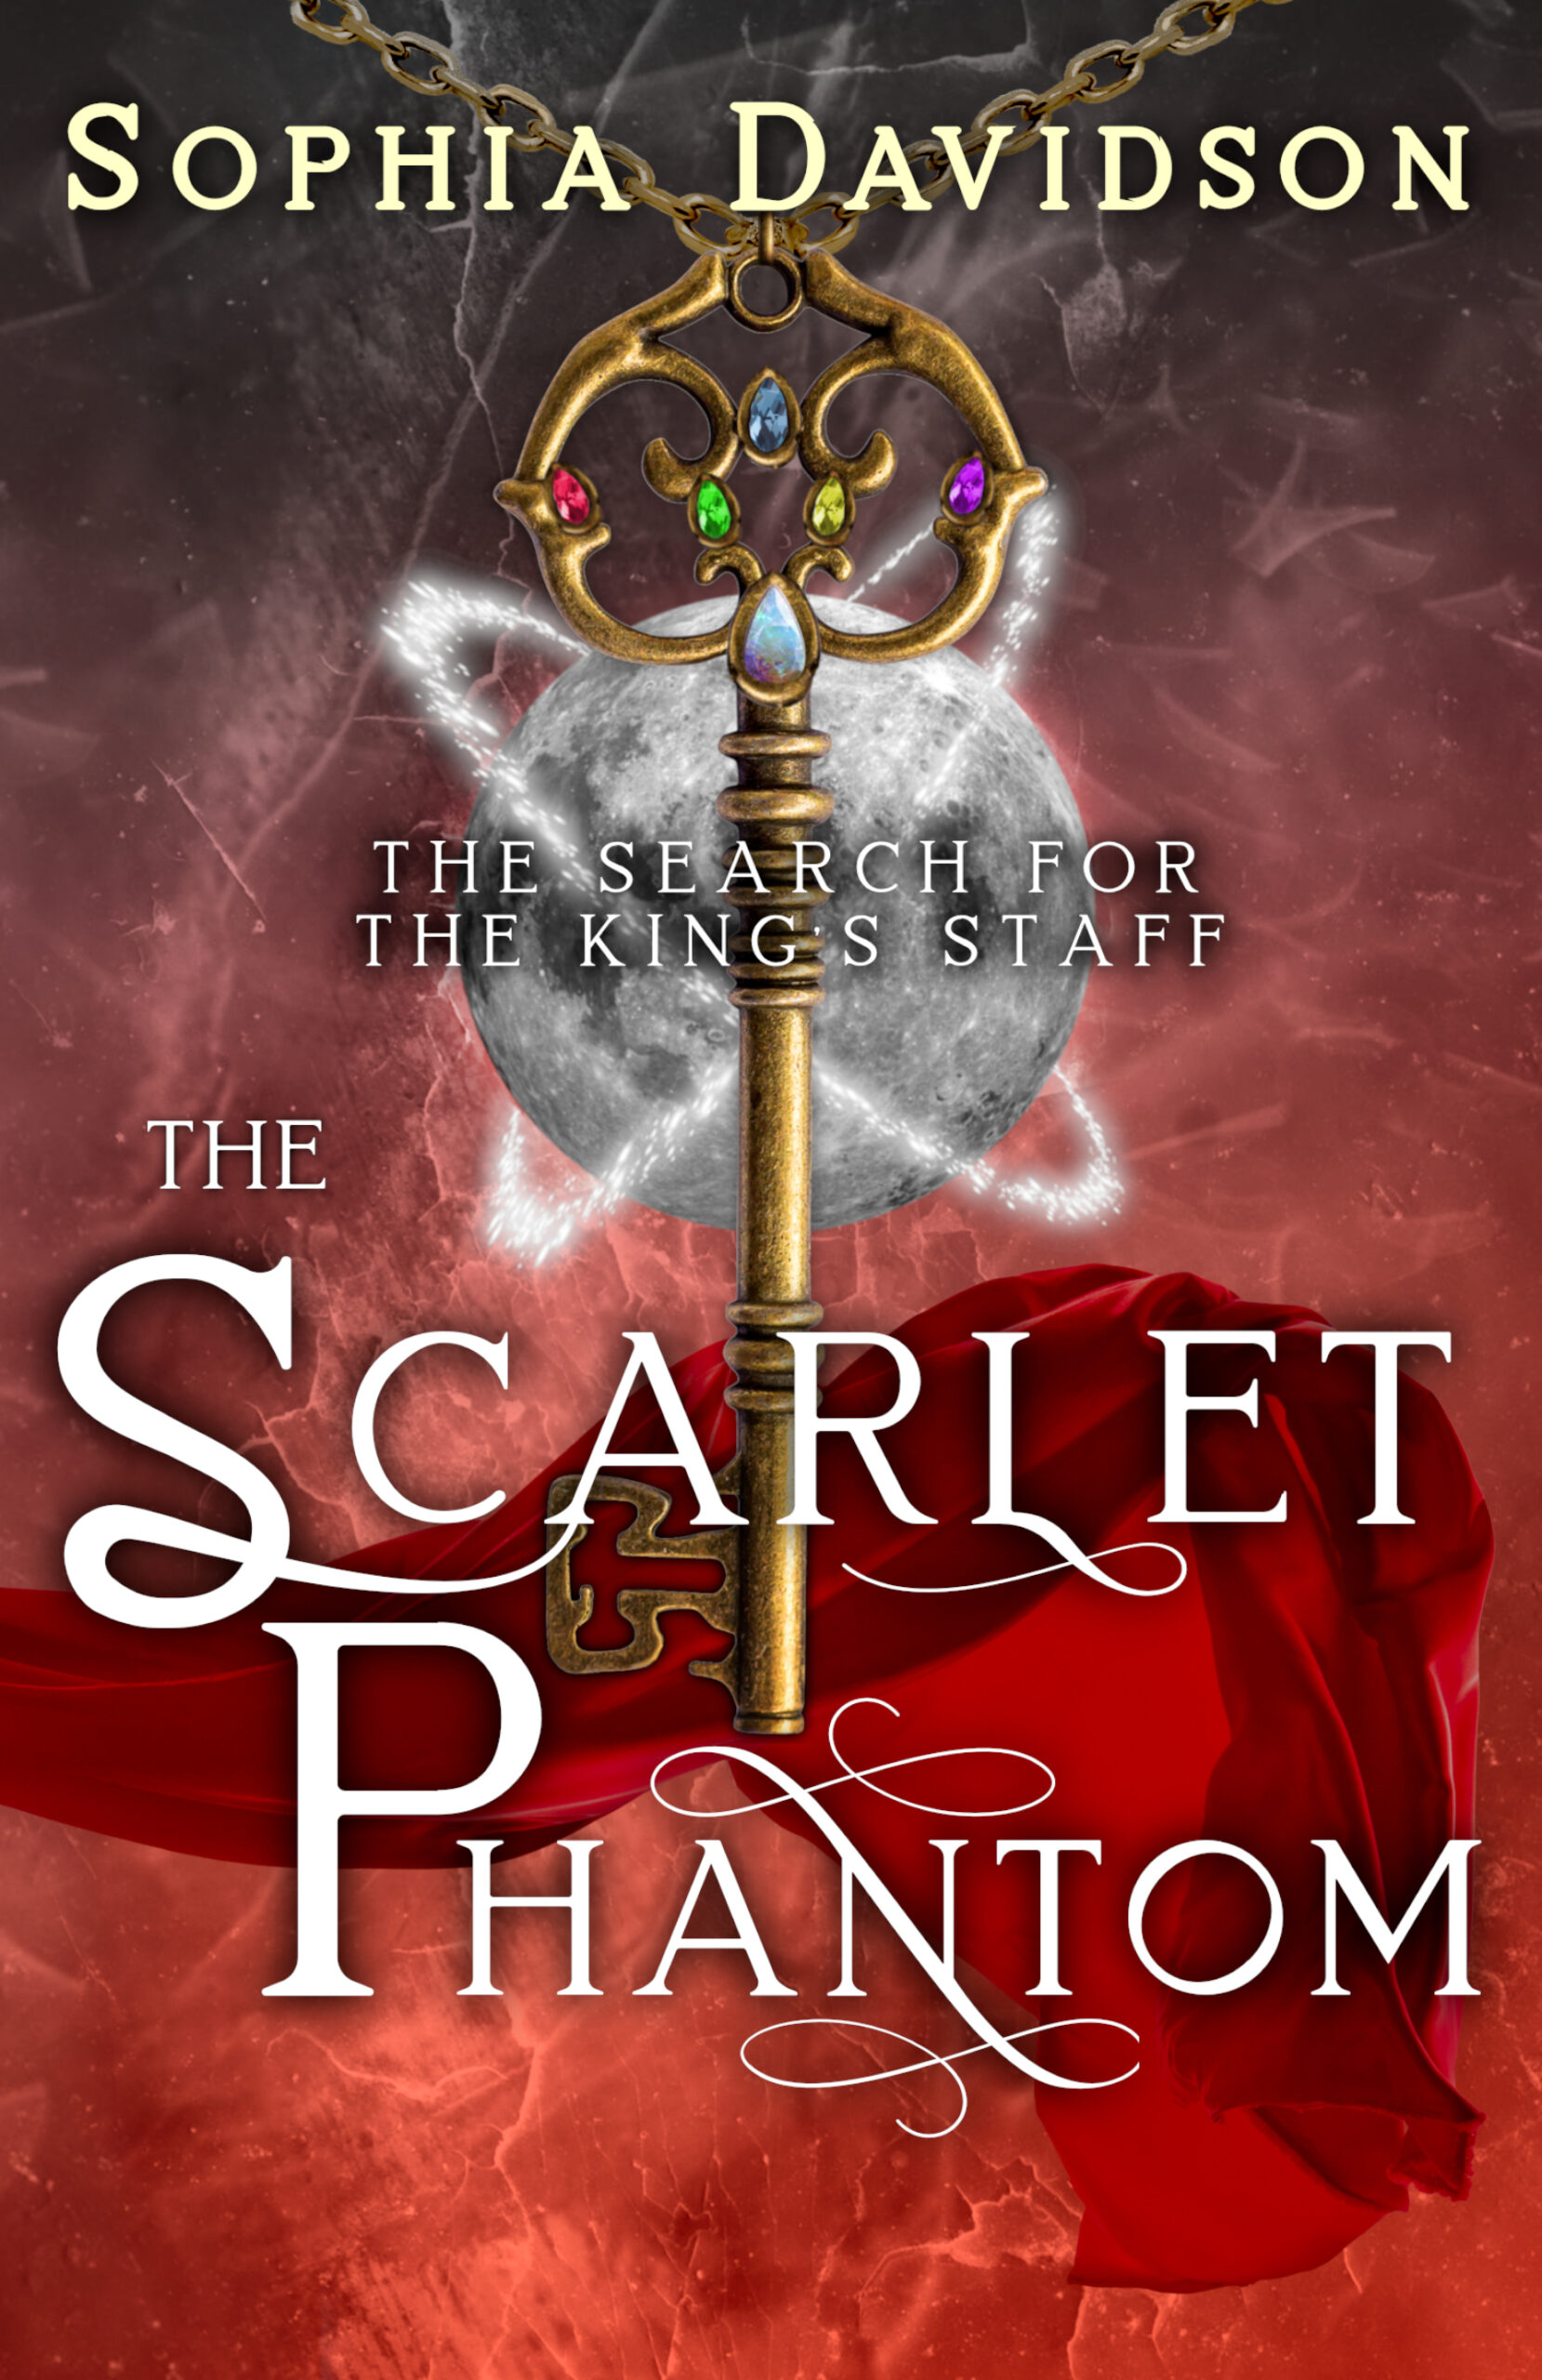 The Scarlet Phantom: Book 2 is Available for Purchase